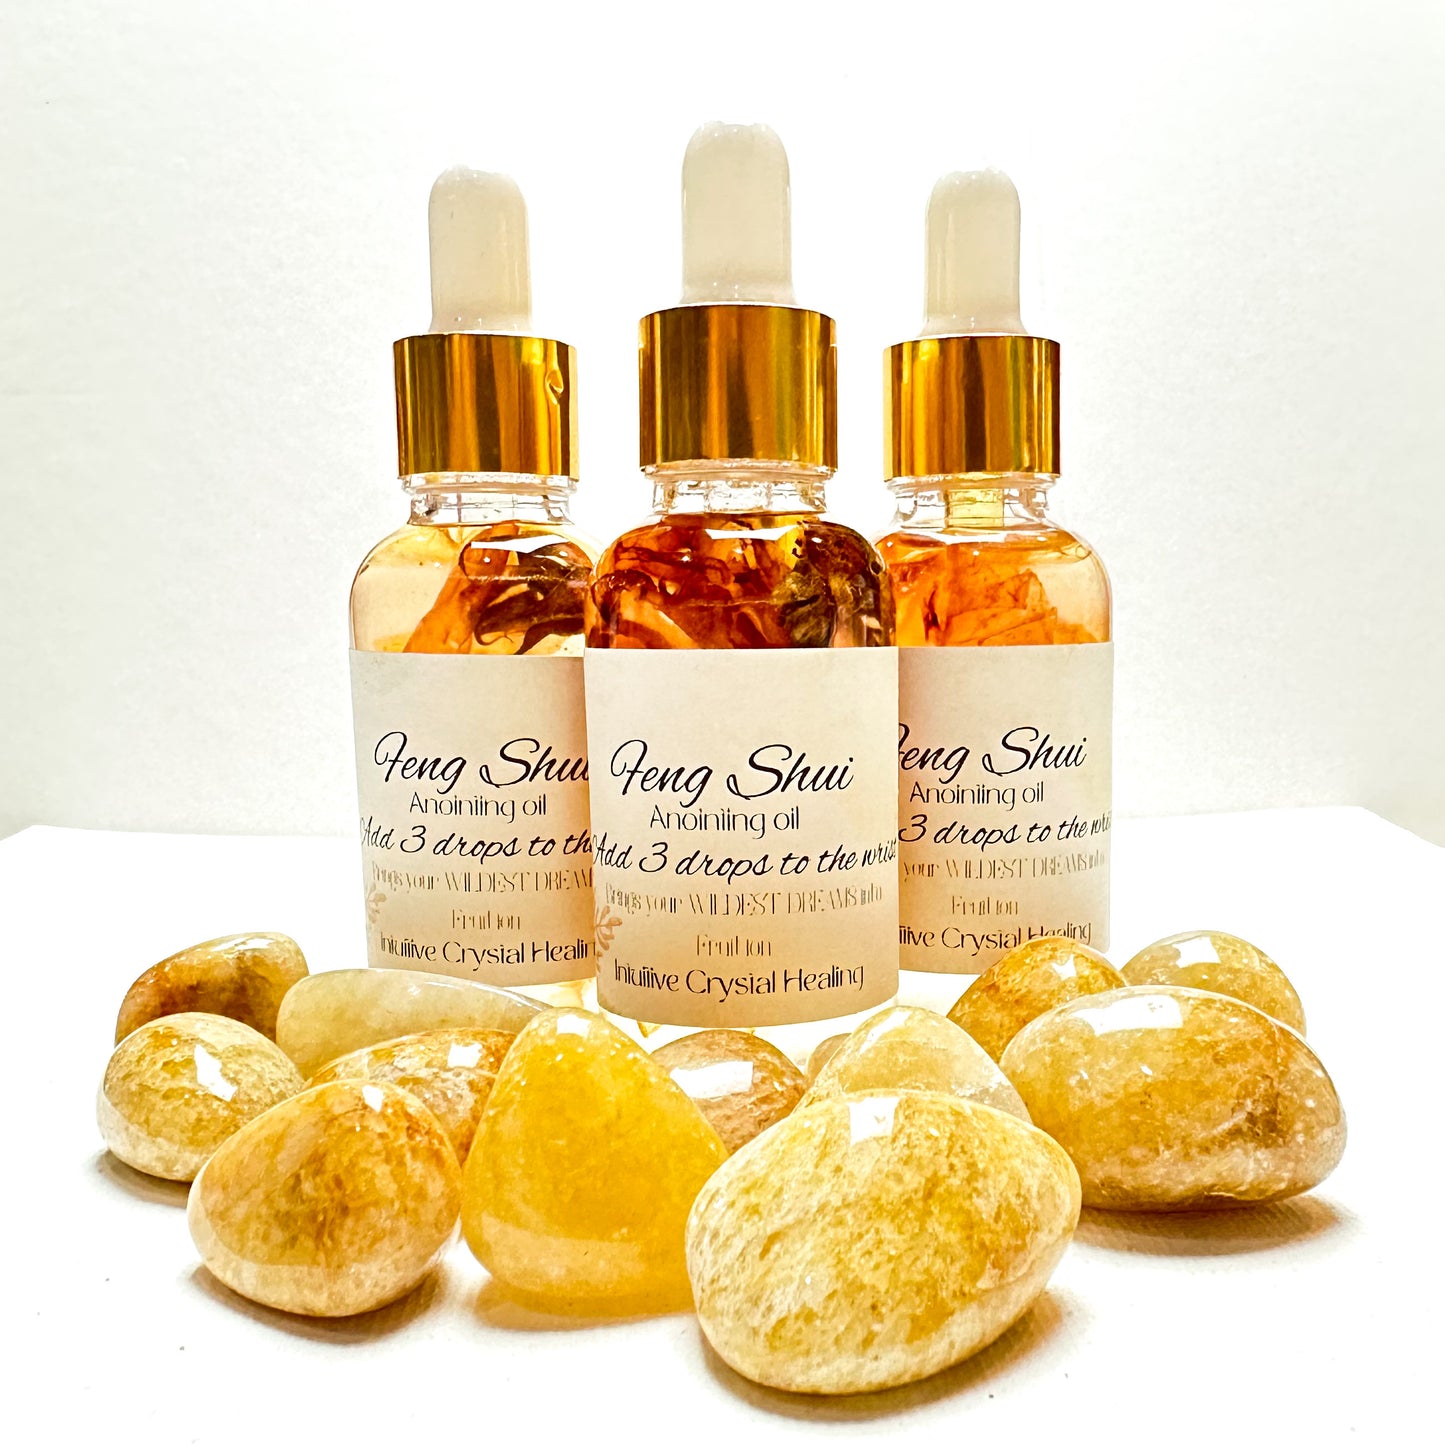 Feng Shui anointing oil